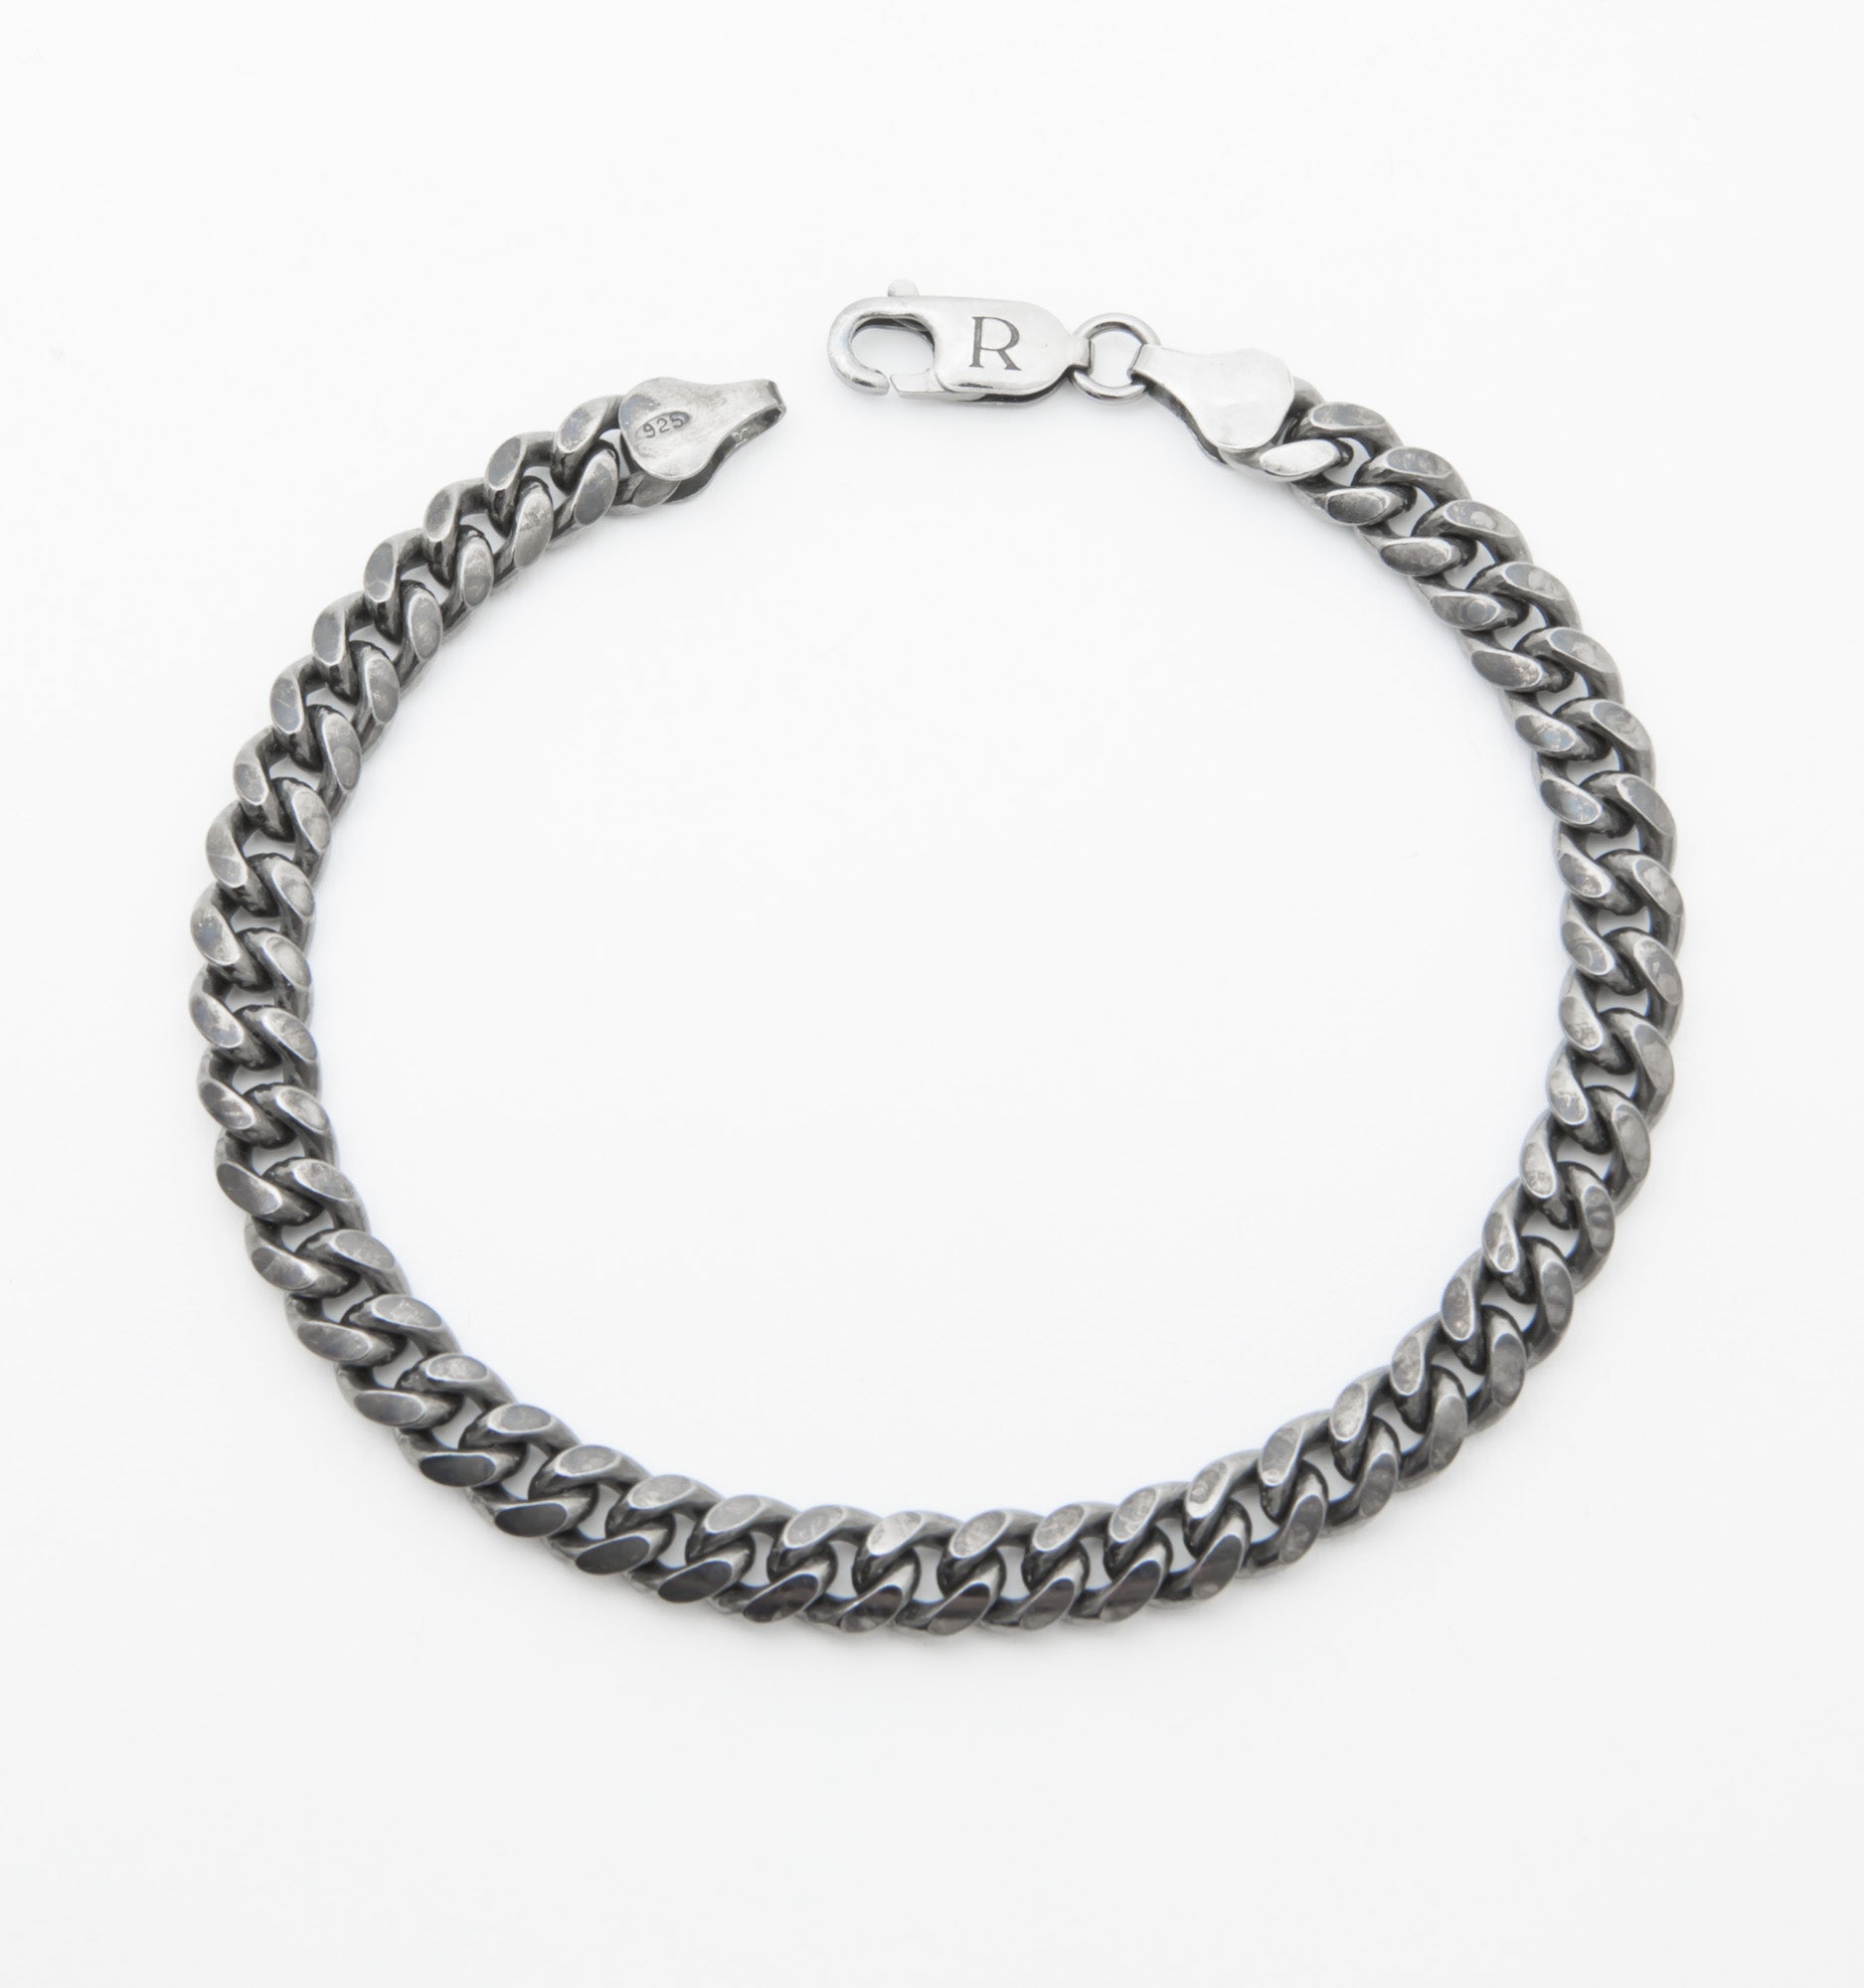 Mens Silver Curb Chain Bracelet - 925 Sterling Silver 8.5